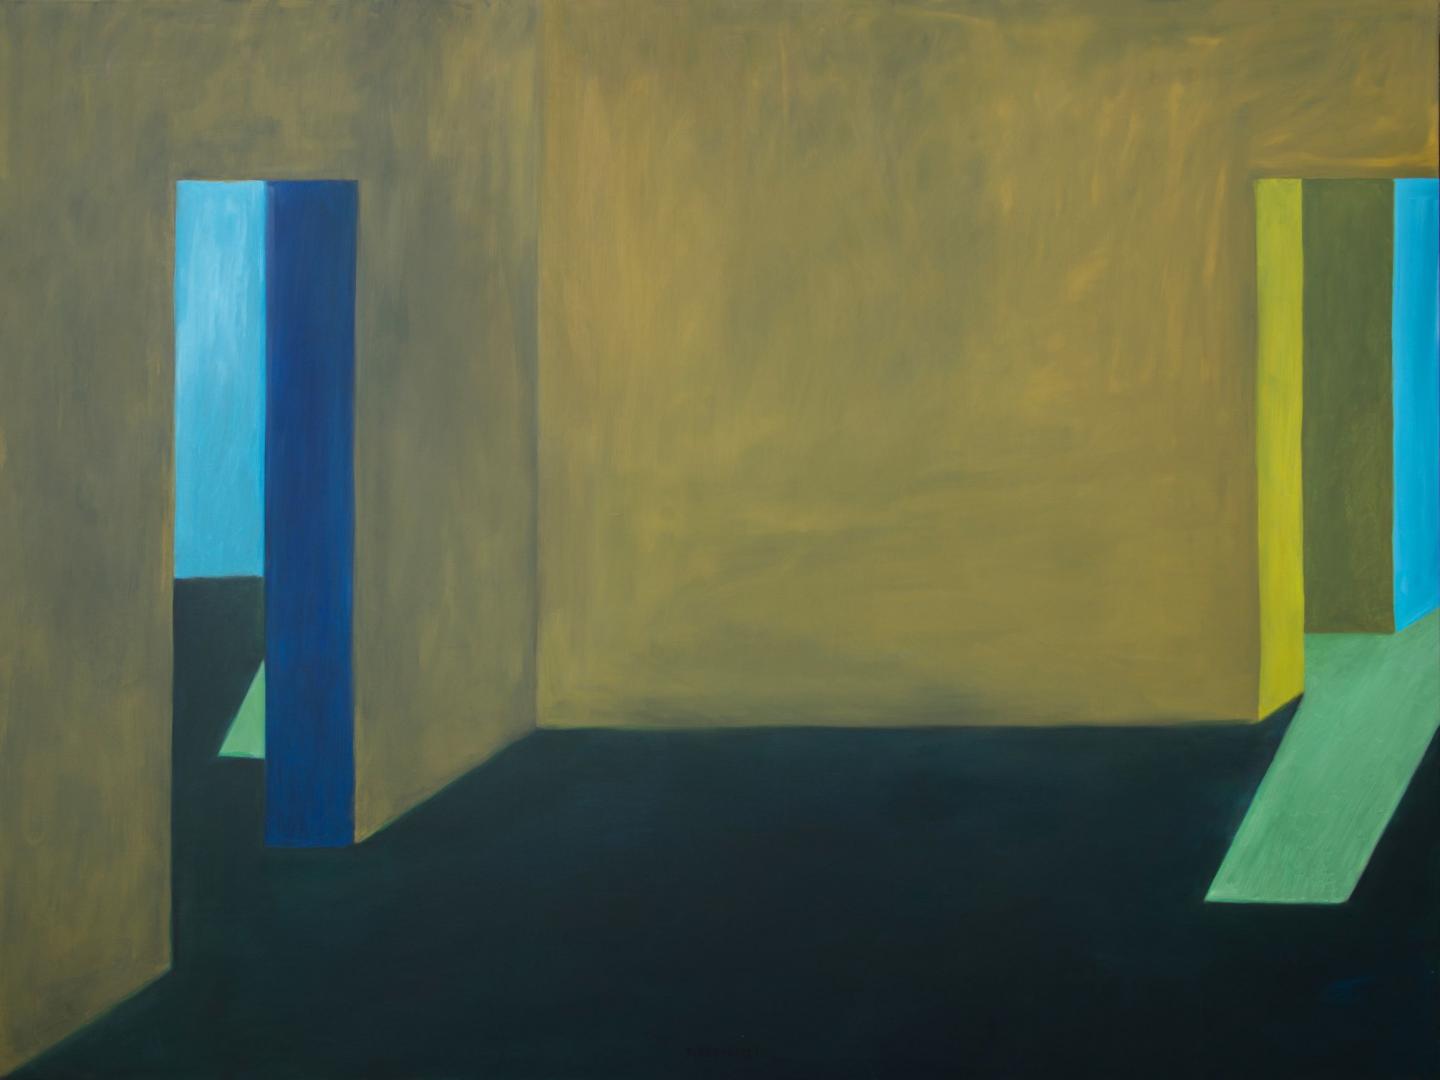 a painting of a room with bar yellow walls with a doorway into a blue room